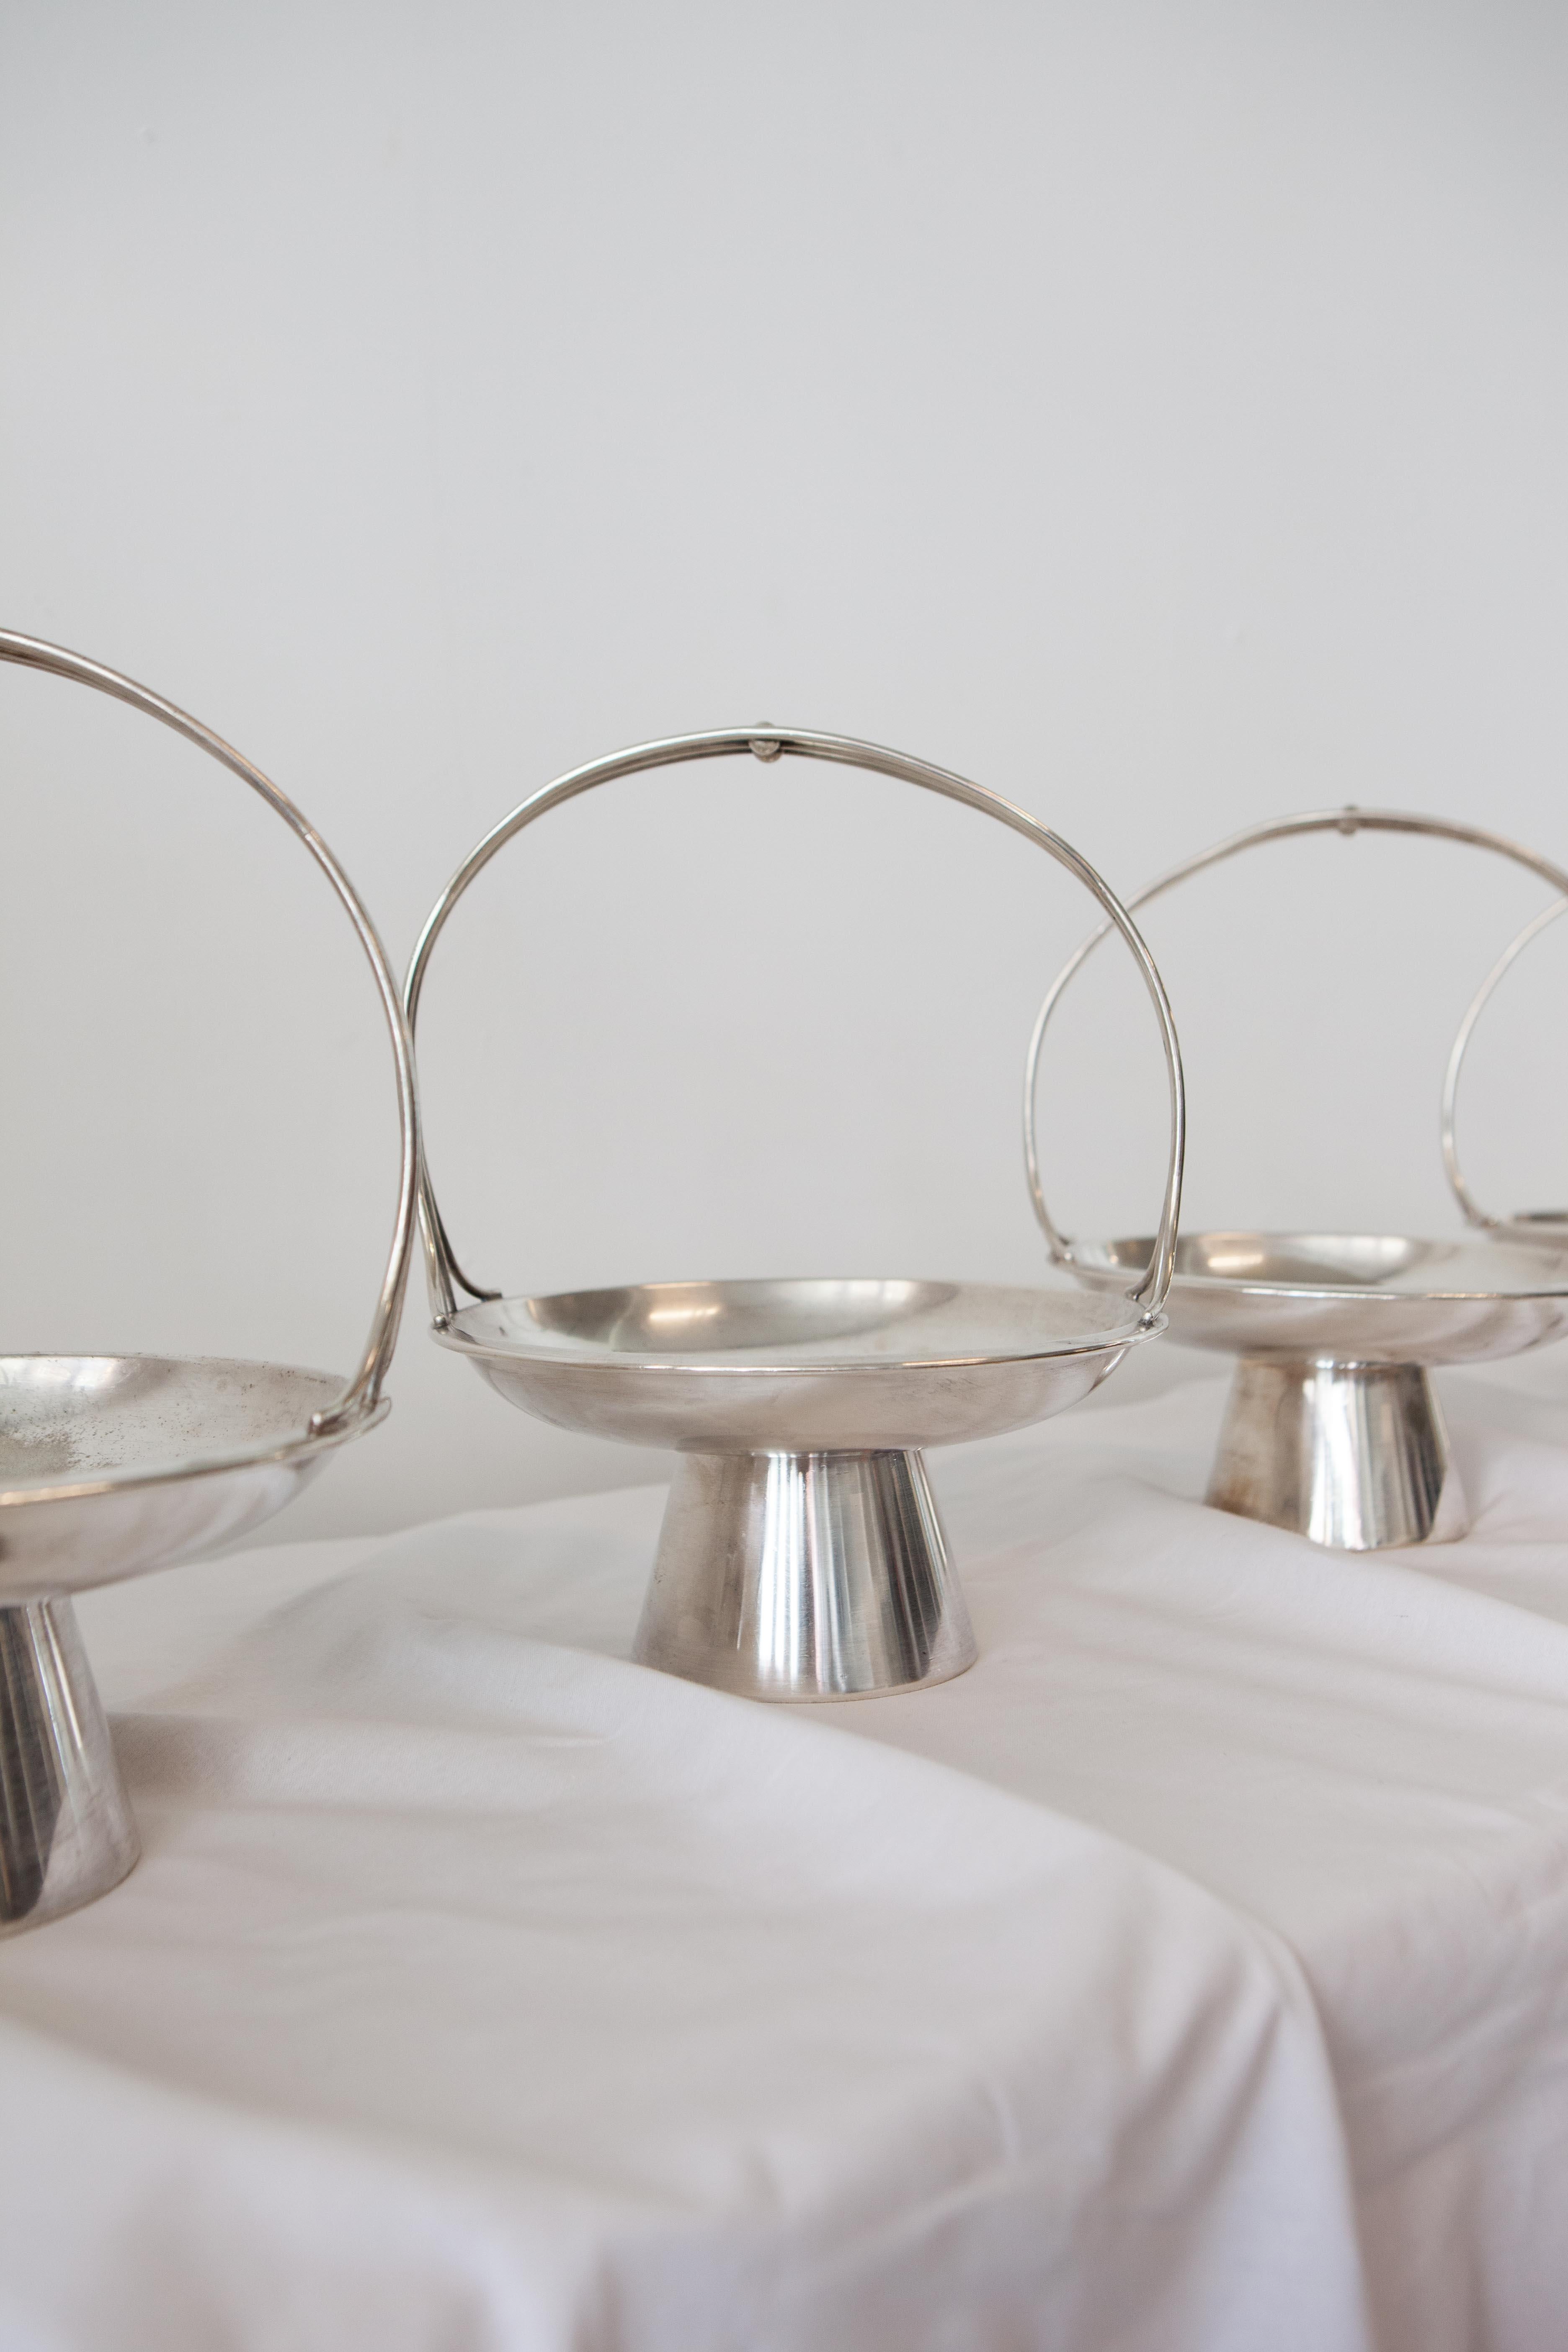 Set of 4 alpacca fruit baskets by Gio Ponti for Arthur Krupp, Italy, 1930s For Sale 1